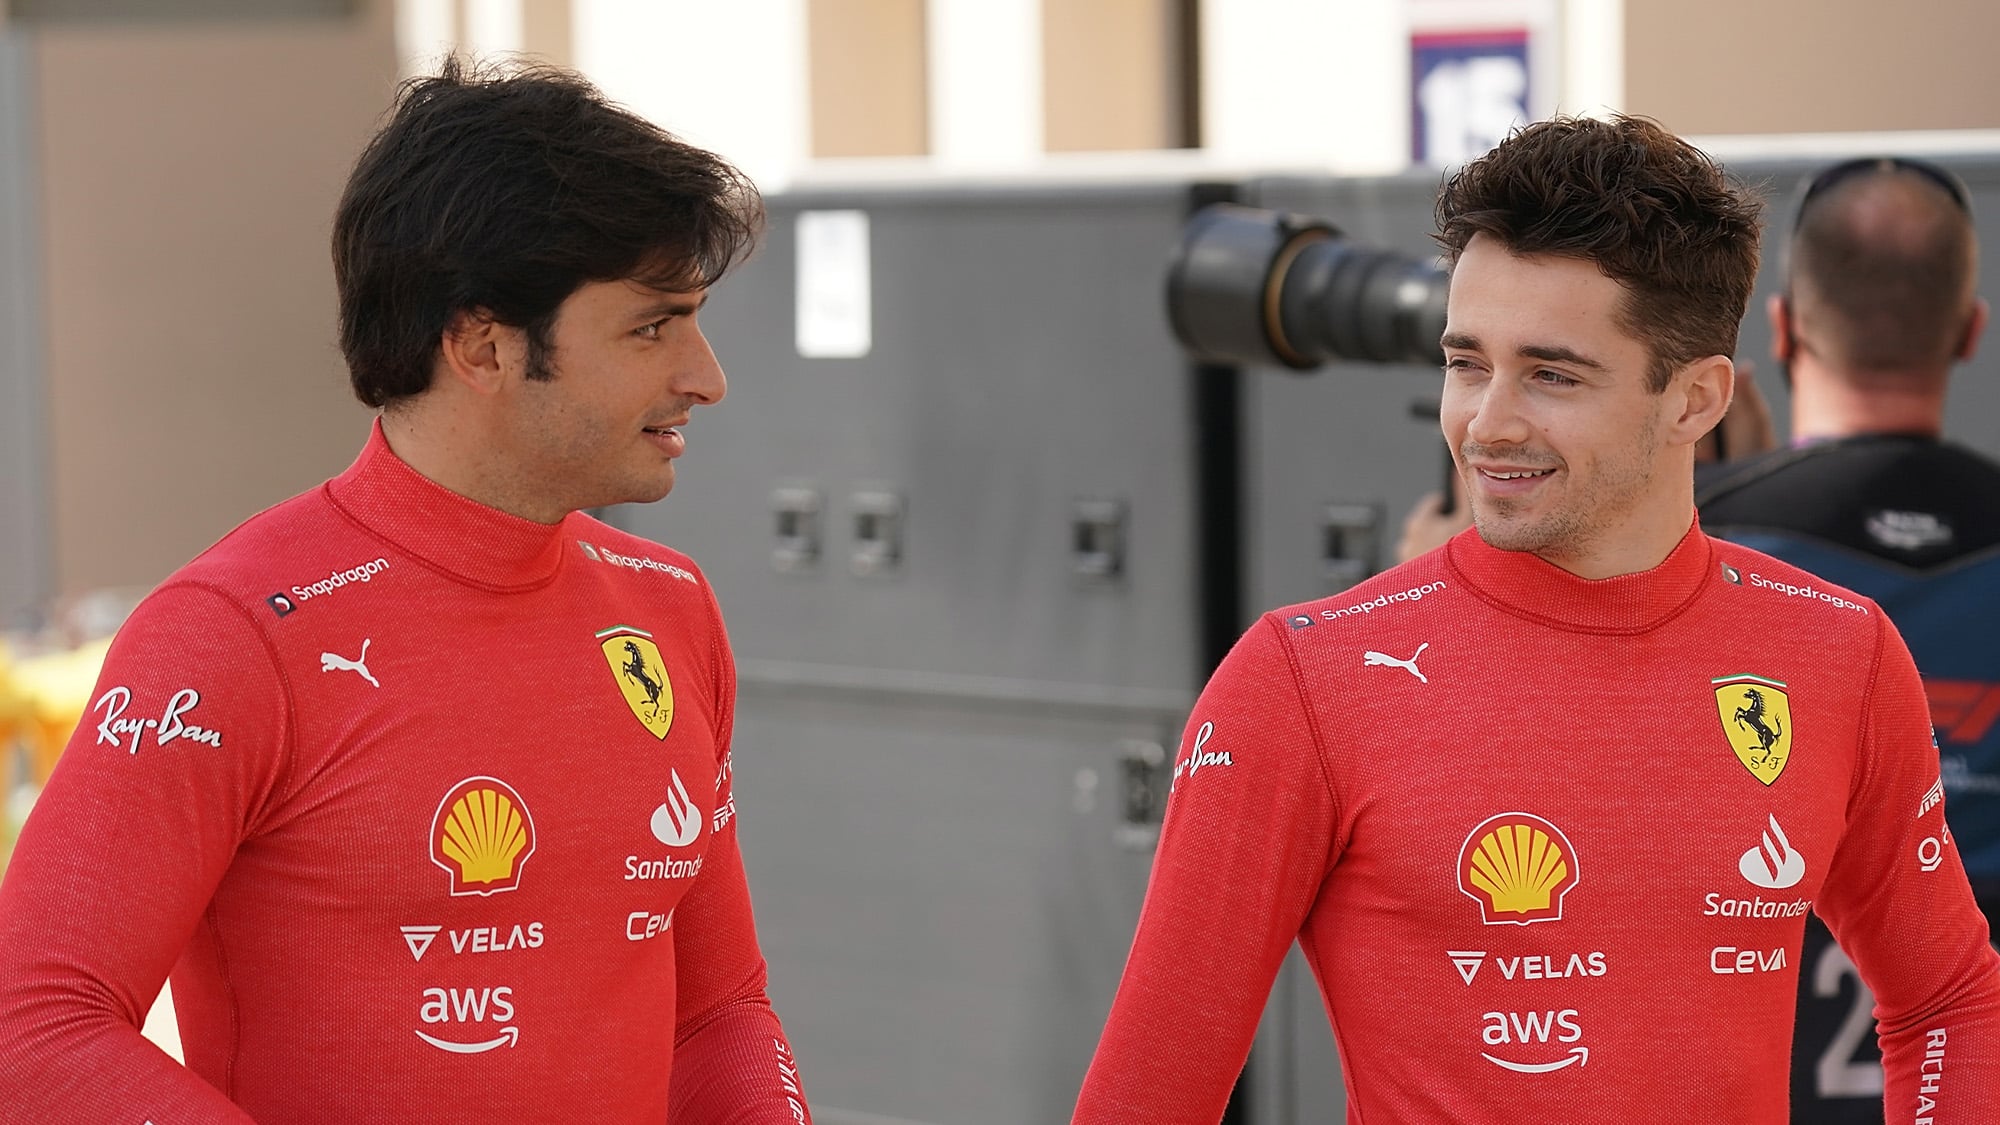 We have a smile on our face after testing': Leclerc and Sainz on Ferrari's  2022 F1 chances - Motor Sport Magazine